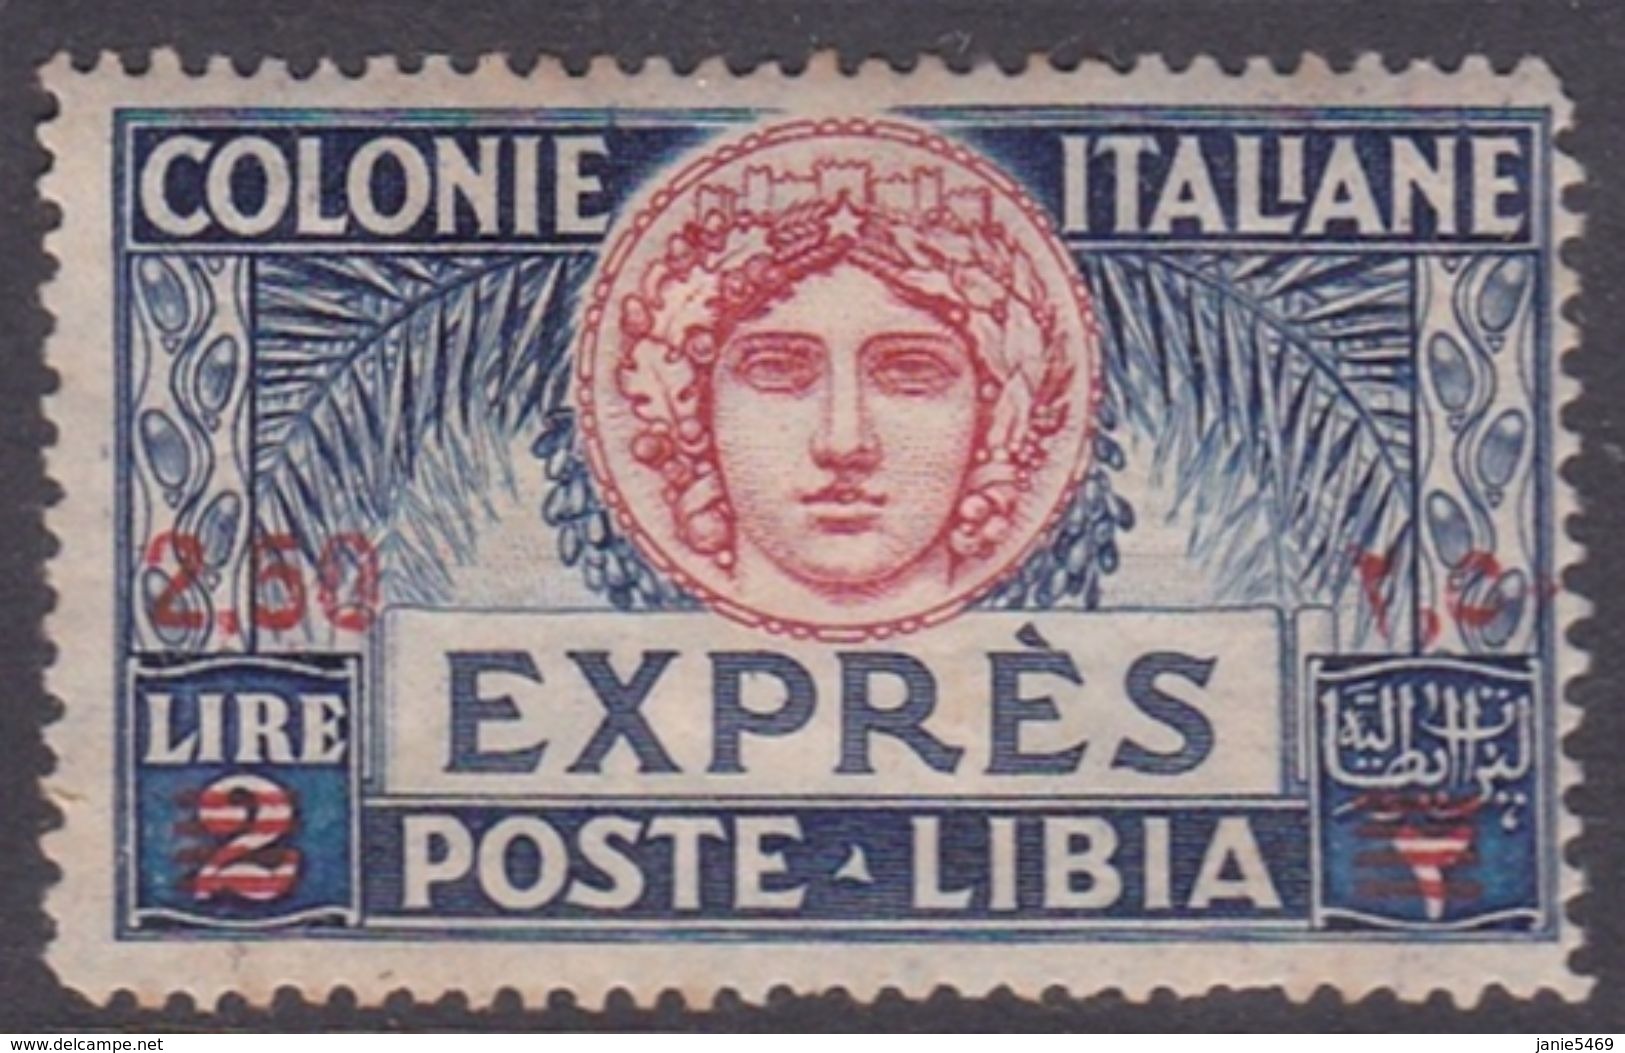 Italy-Colonies And Territories-Libya E 10 1922 Special Delivery Stamp, 2,50 On 2 Lire, Mint Never Hinged - Libya